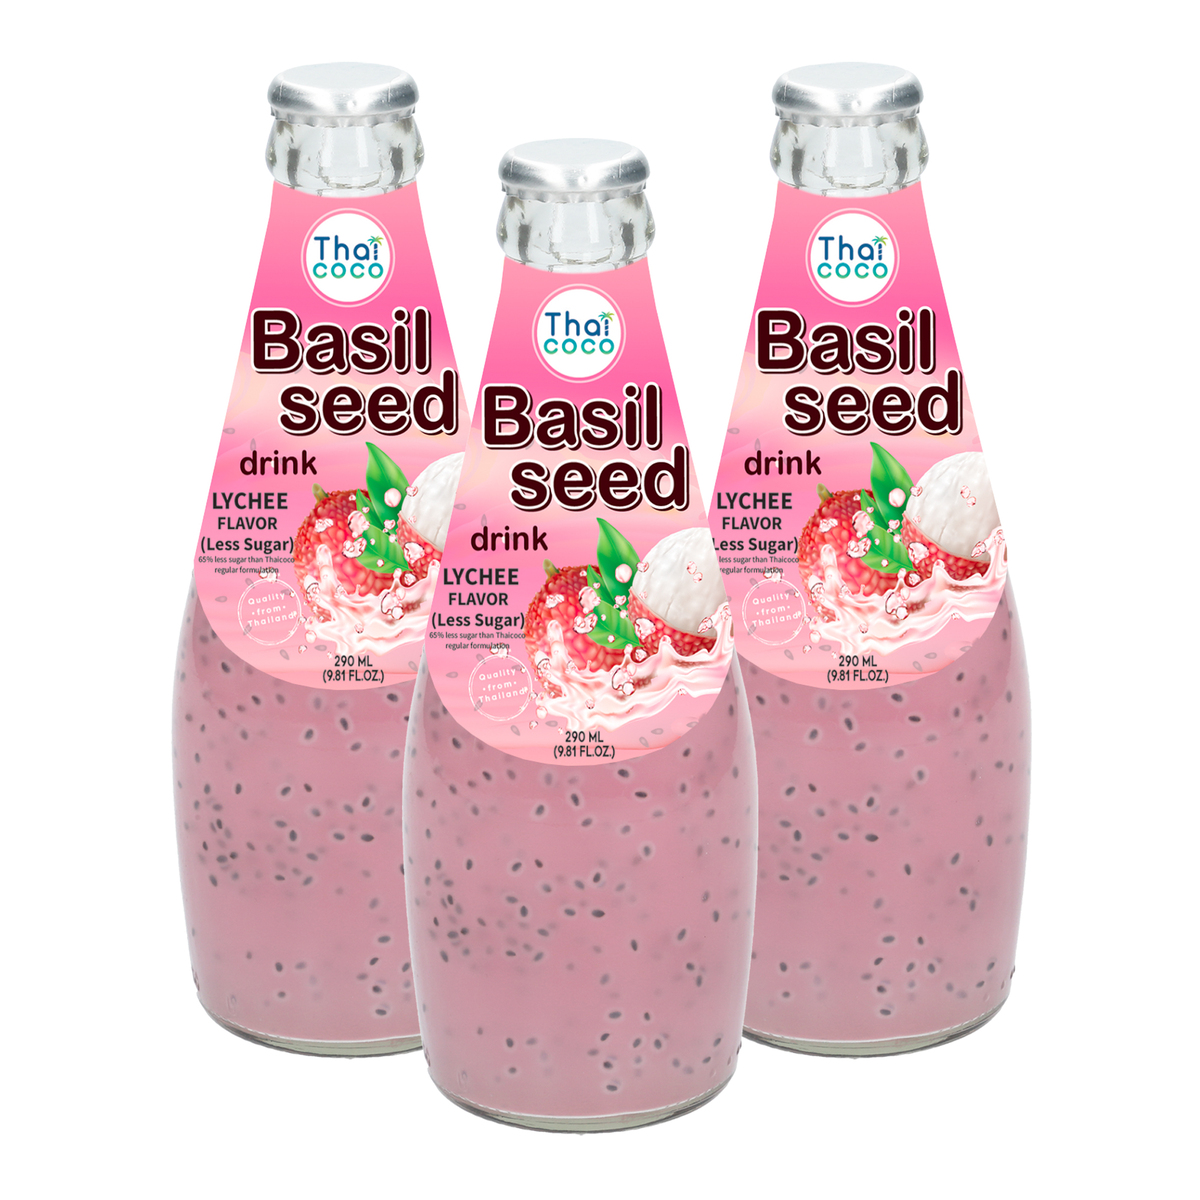 Thai Coco Basil Seed Drink With Lychee Flavour Value Pack 3 x 290 ml